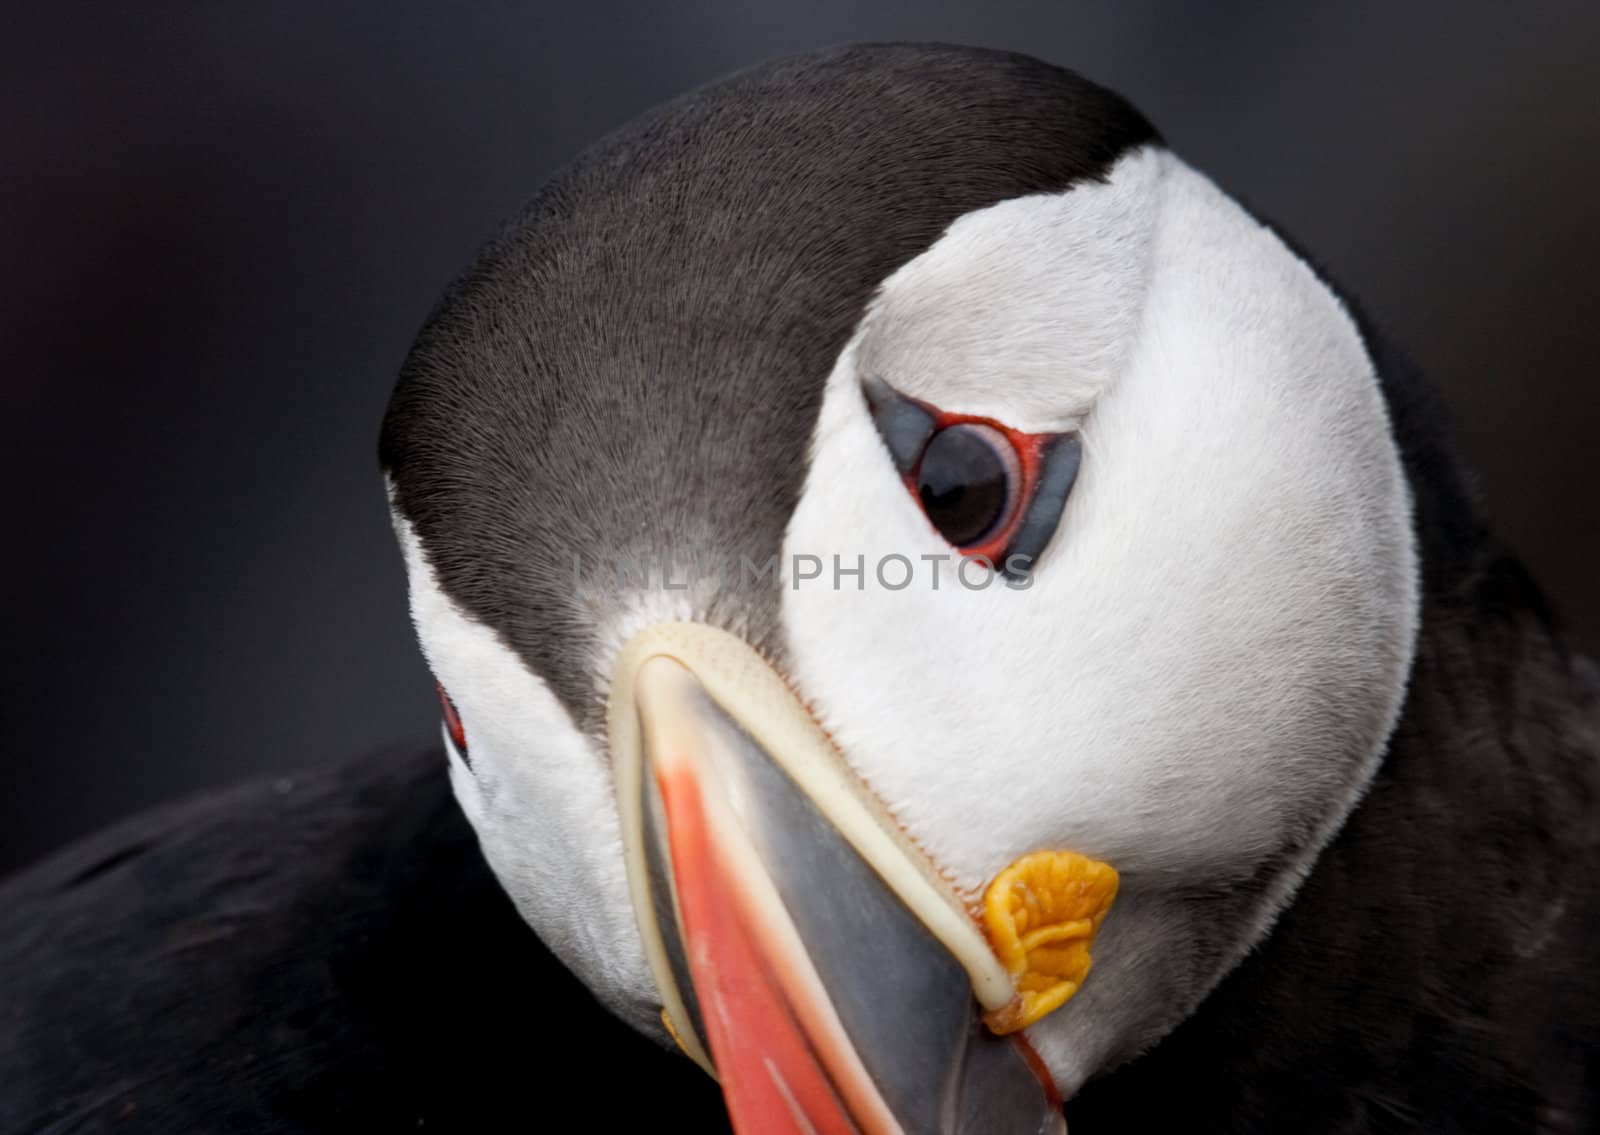 Curious, head tilted look of an Atlantic Puffin. 2009 image from Iceland, Latrabjarg Cliffs, a remote, high cliff rookery site.